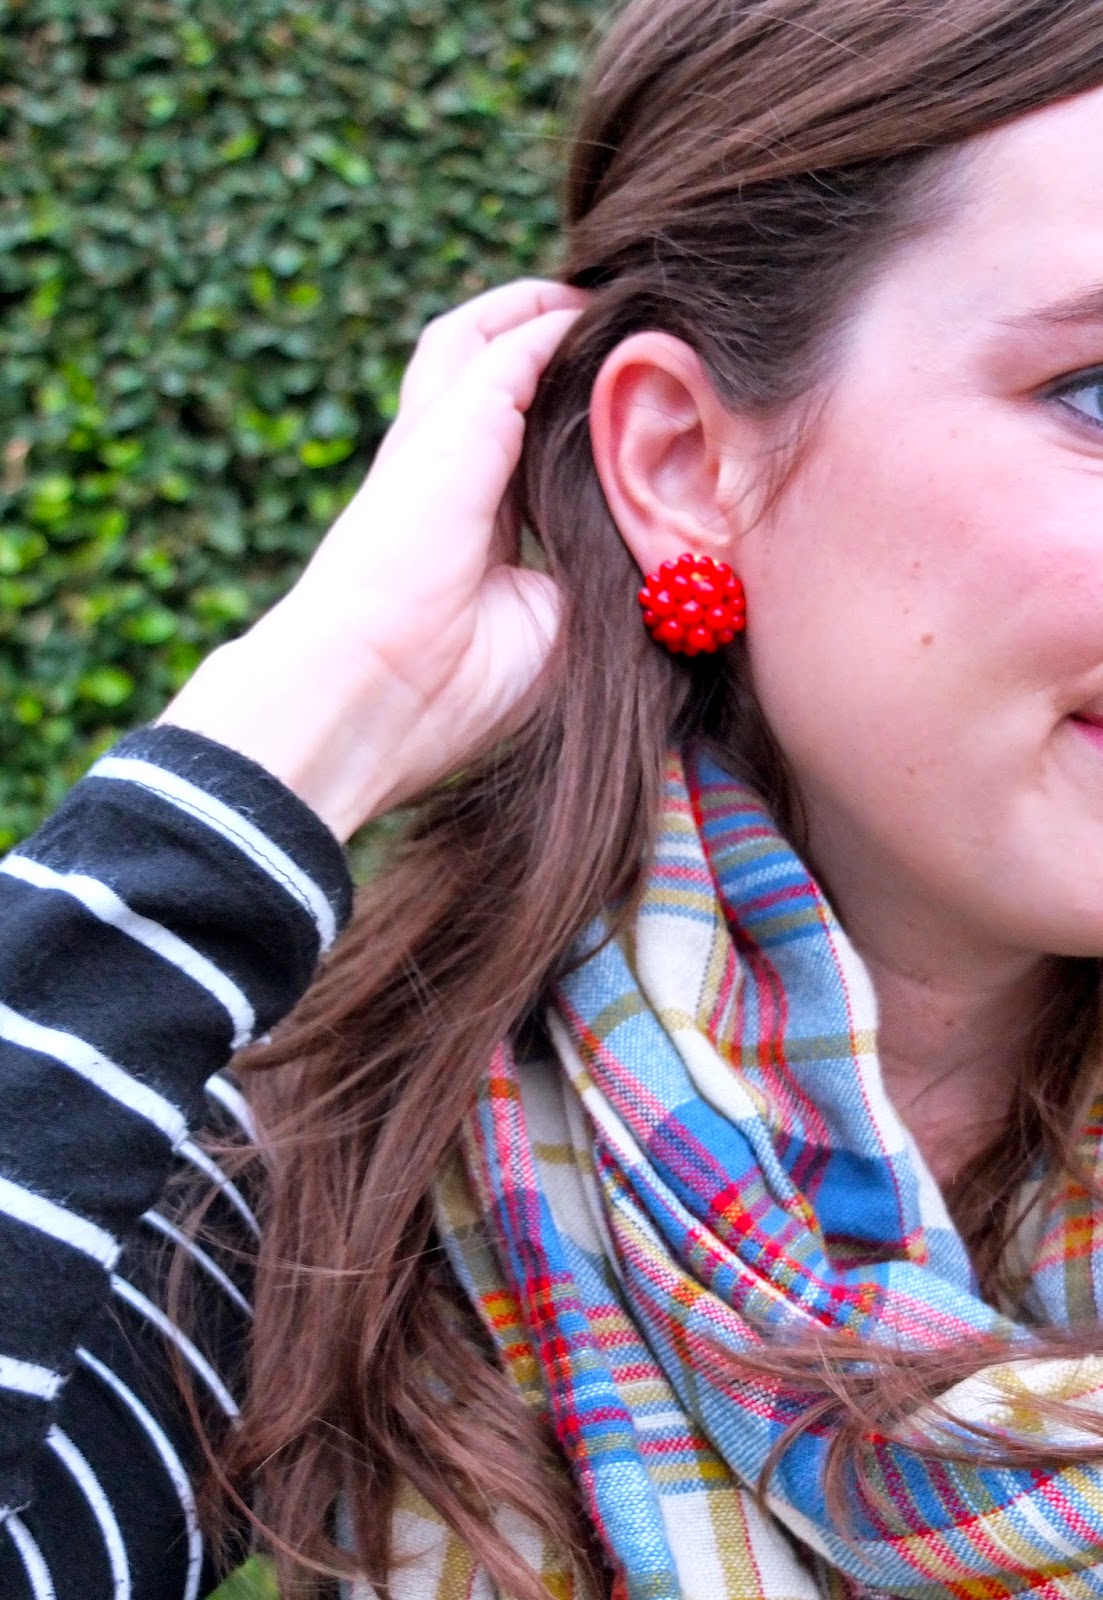 Lisi Lerch Earrings, Lisi Lerch Red Earrings, Lisi Lerch Button Earrings, Lisi Lerch Button, Red Button Earrings, The Lone Star Looking Glass Blog